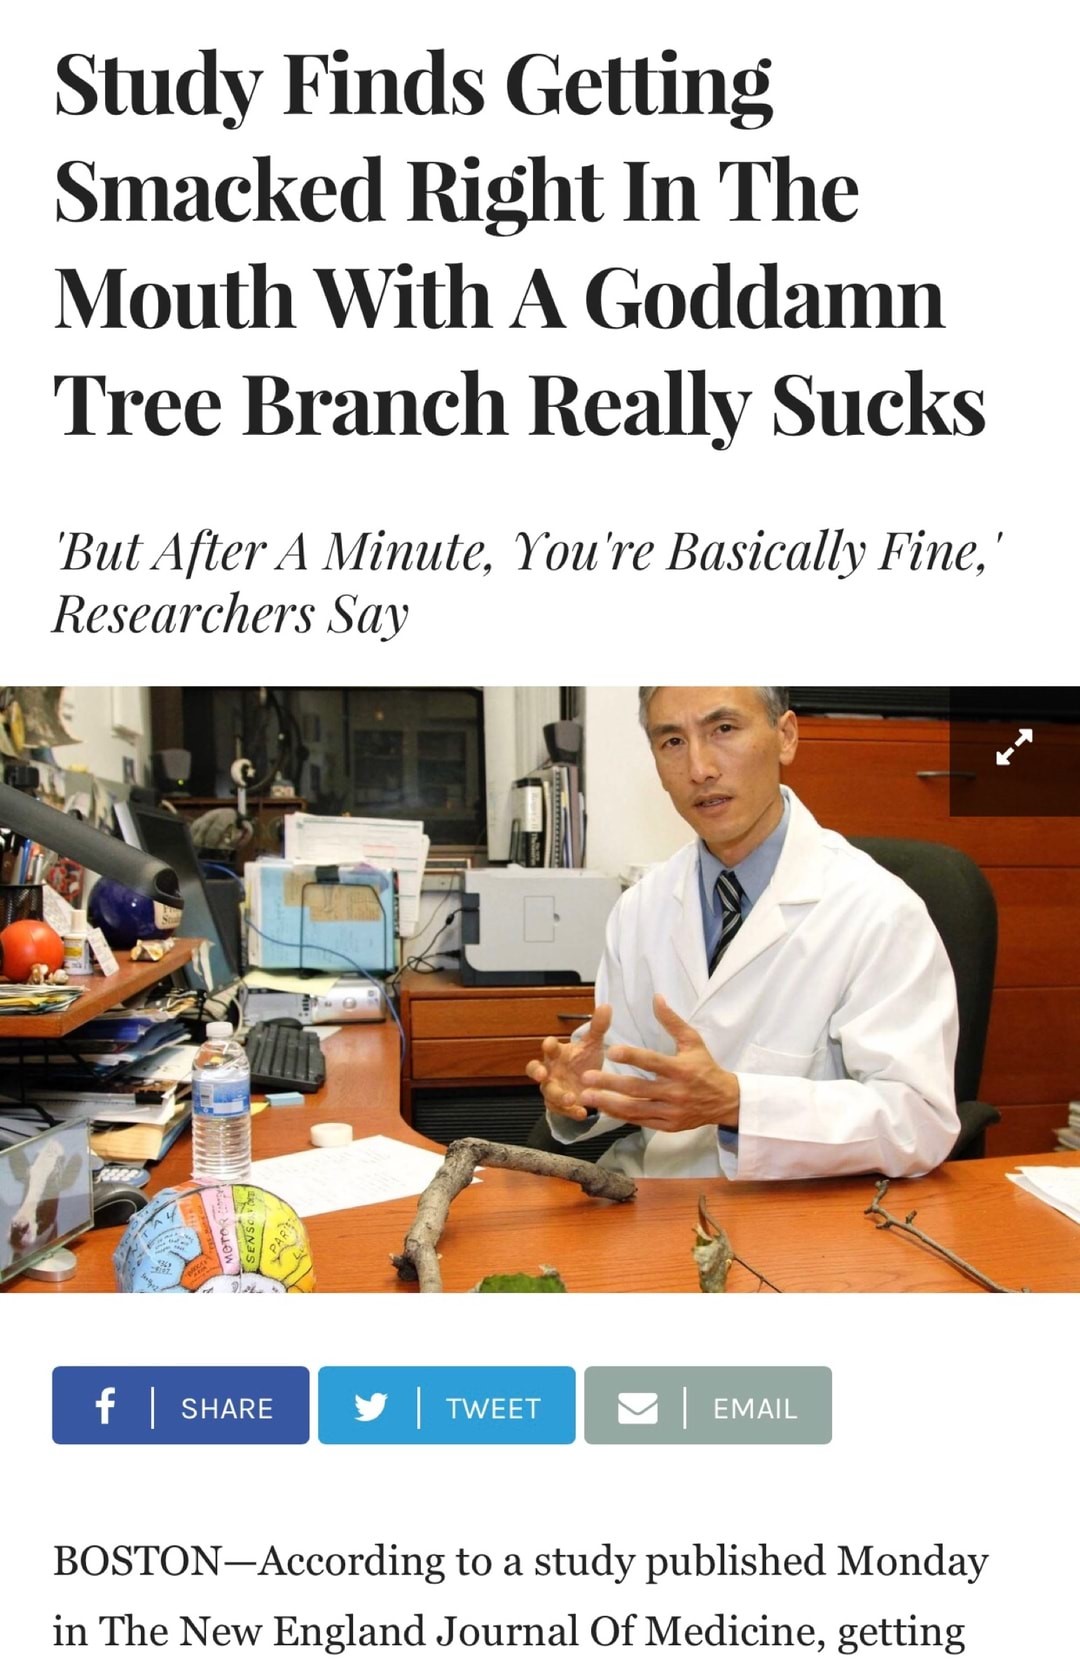 Onion Article about how getting smacked in the mouth with a tree branch hurts.